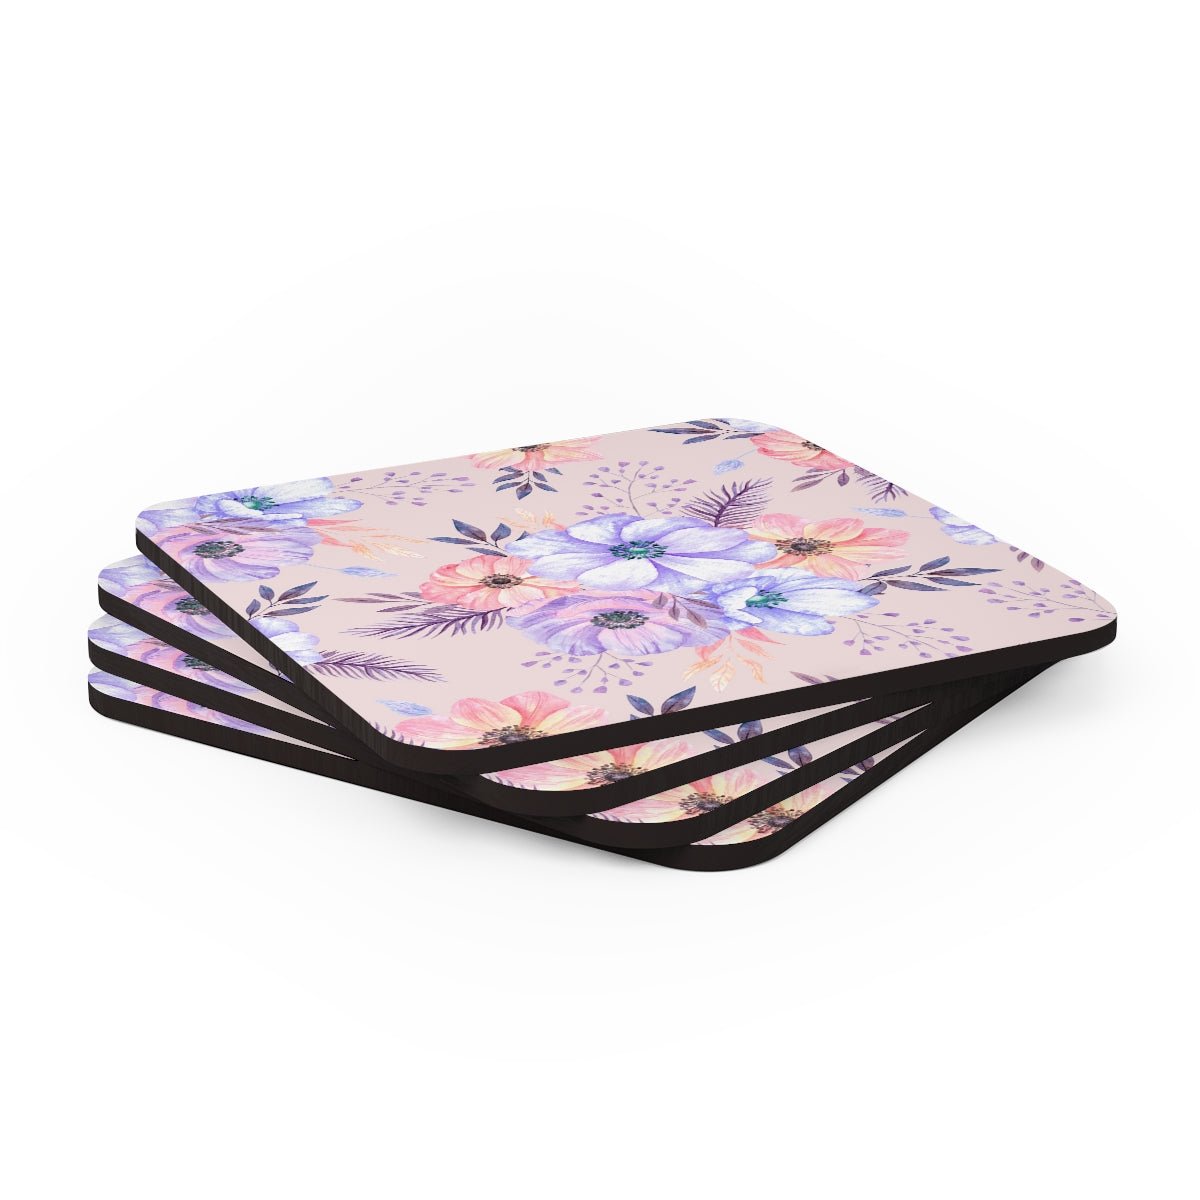 Very Peri Anemones Corkwood Coaster Set - Puffin Lime